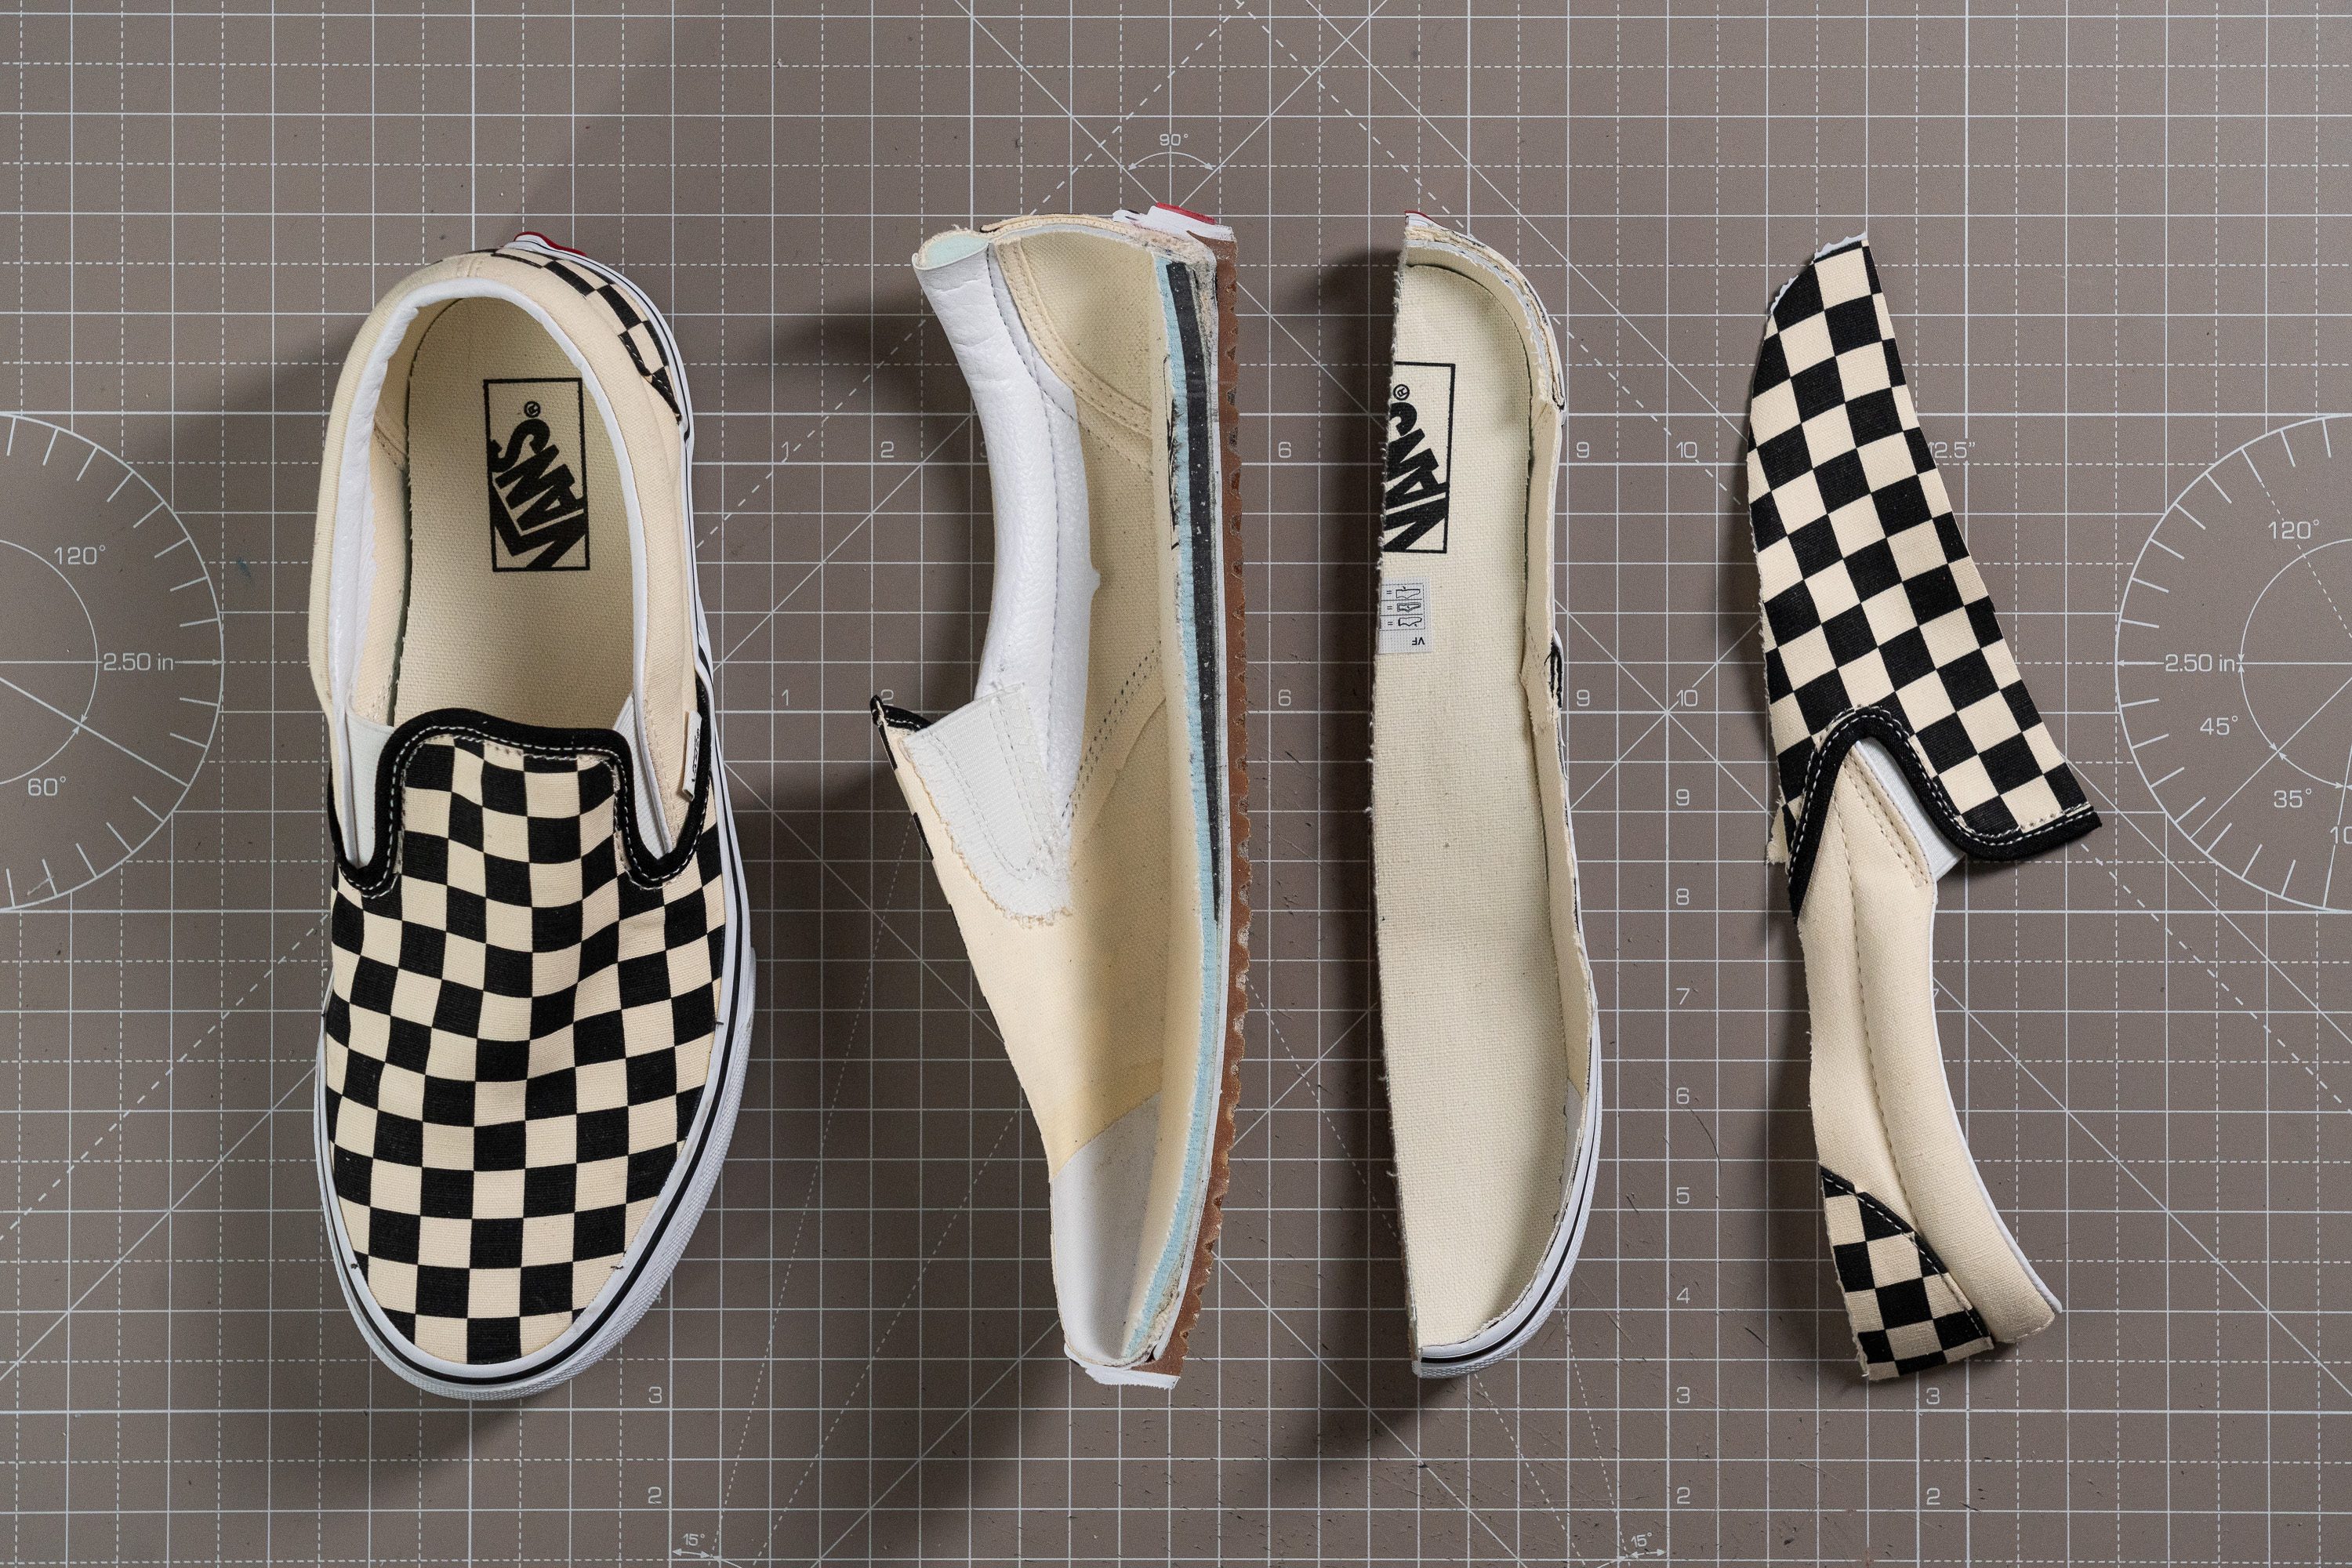 vans mid Slip-On Removable insole